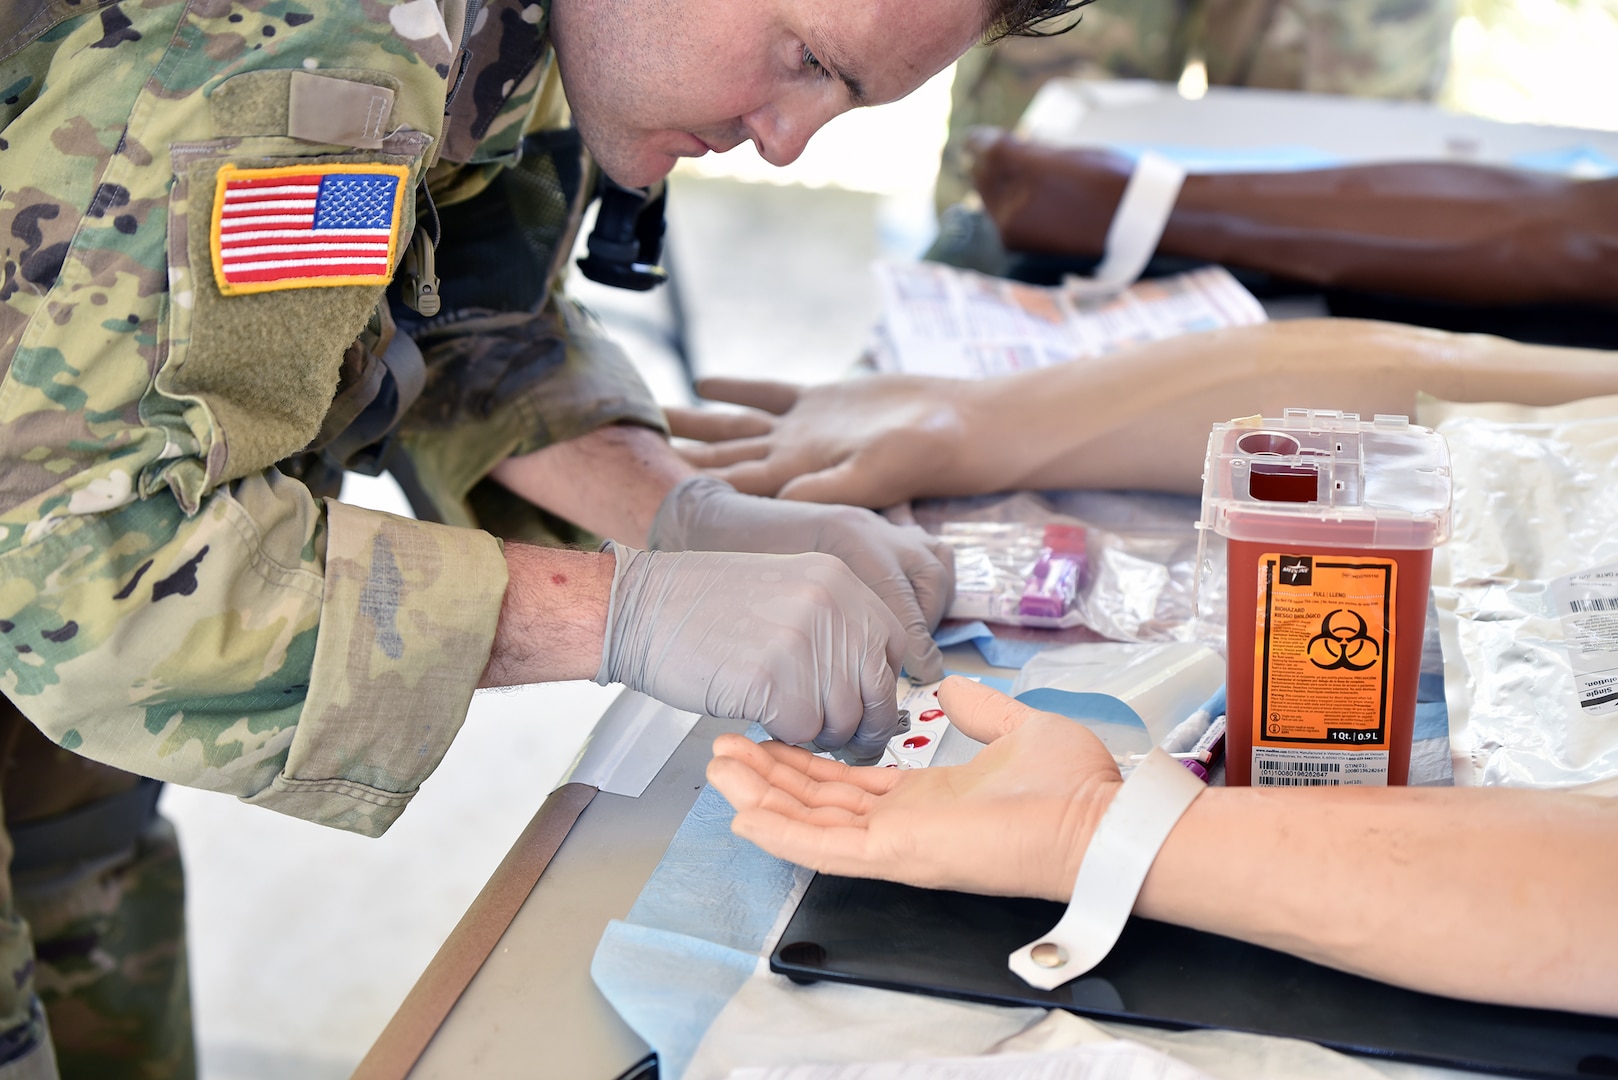 Staff Sgt. Ryan Morgan, 188th Medical Battalion, tests samples of blood to determine their type before preparing to draw whole blood for a simulated transfusion during the Best Medic lane.